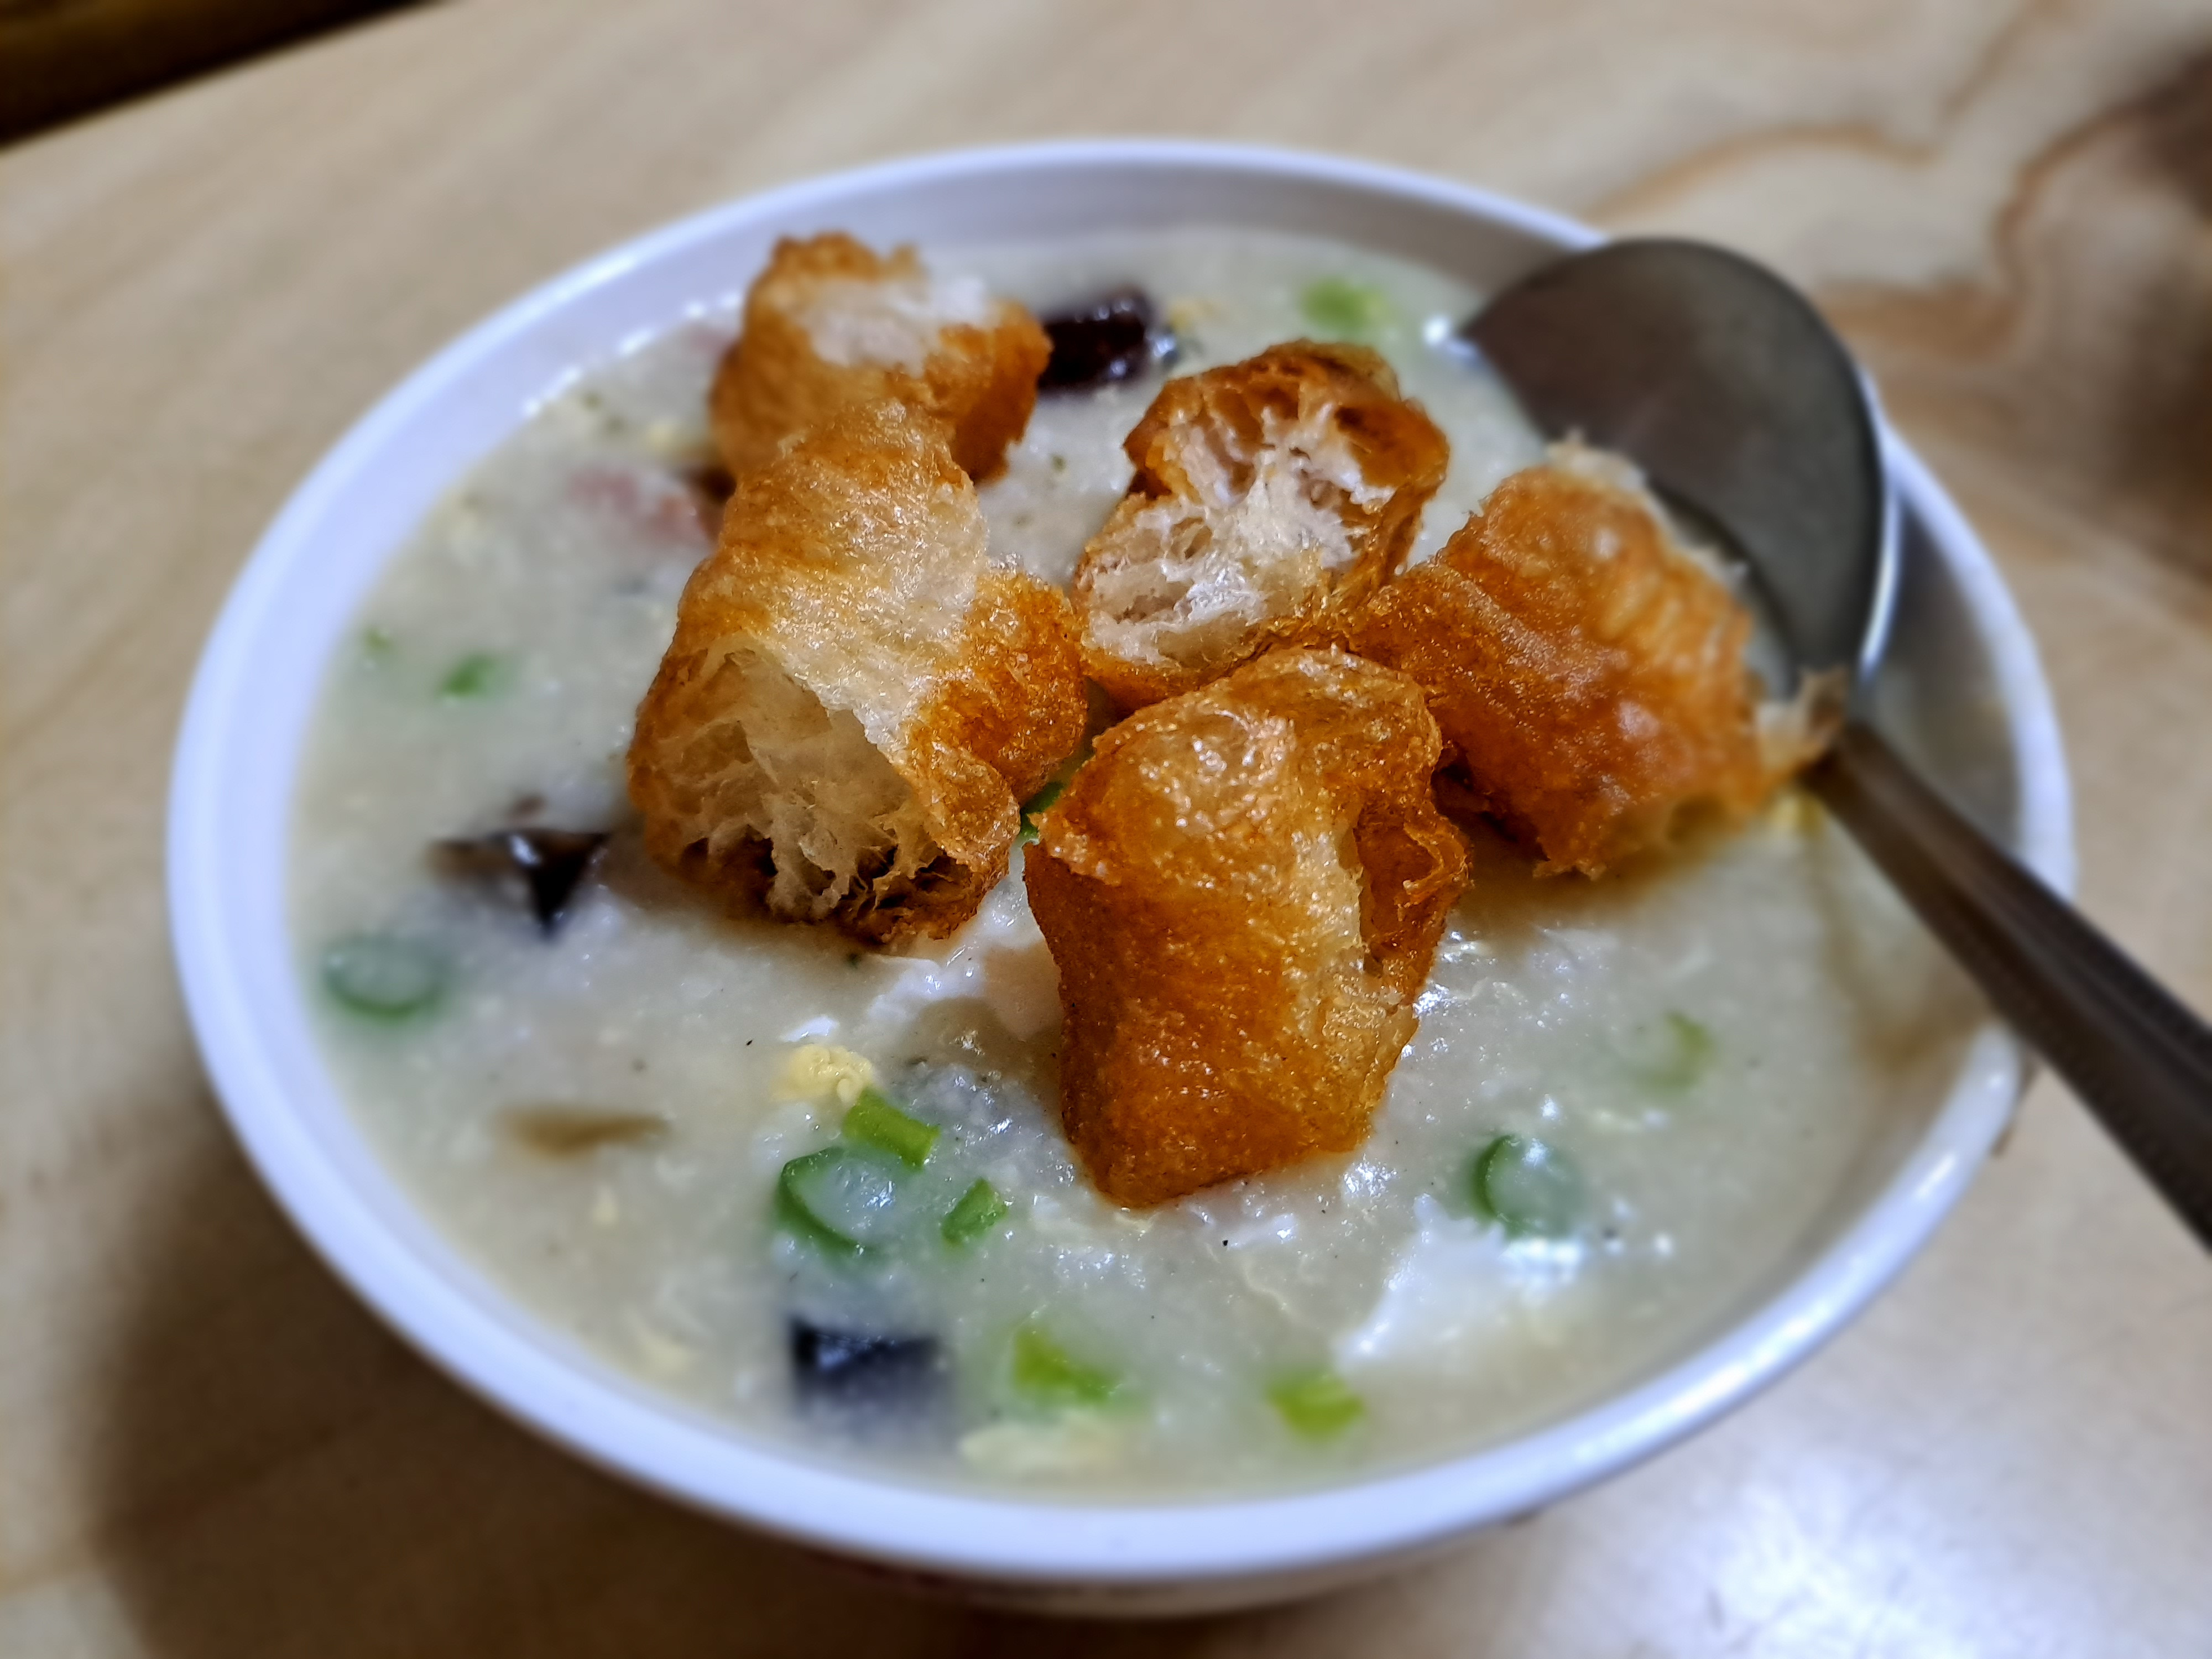 Pork and Century Egg Congee (皮蛋瘦肉粥) with deep fried Chinese breadsticks (油條)